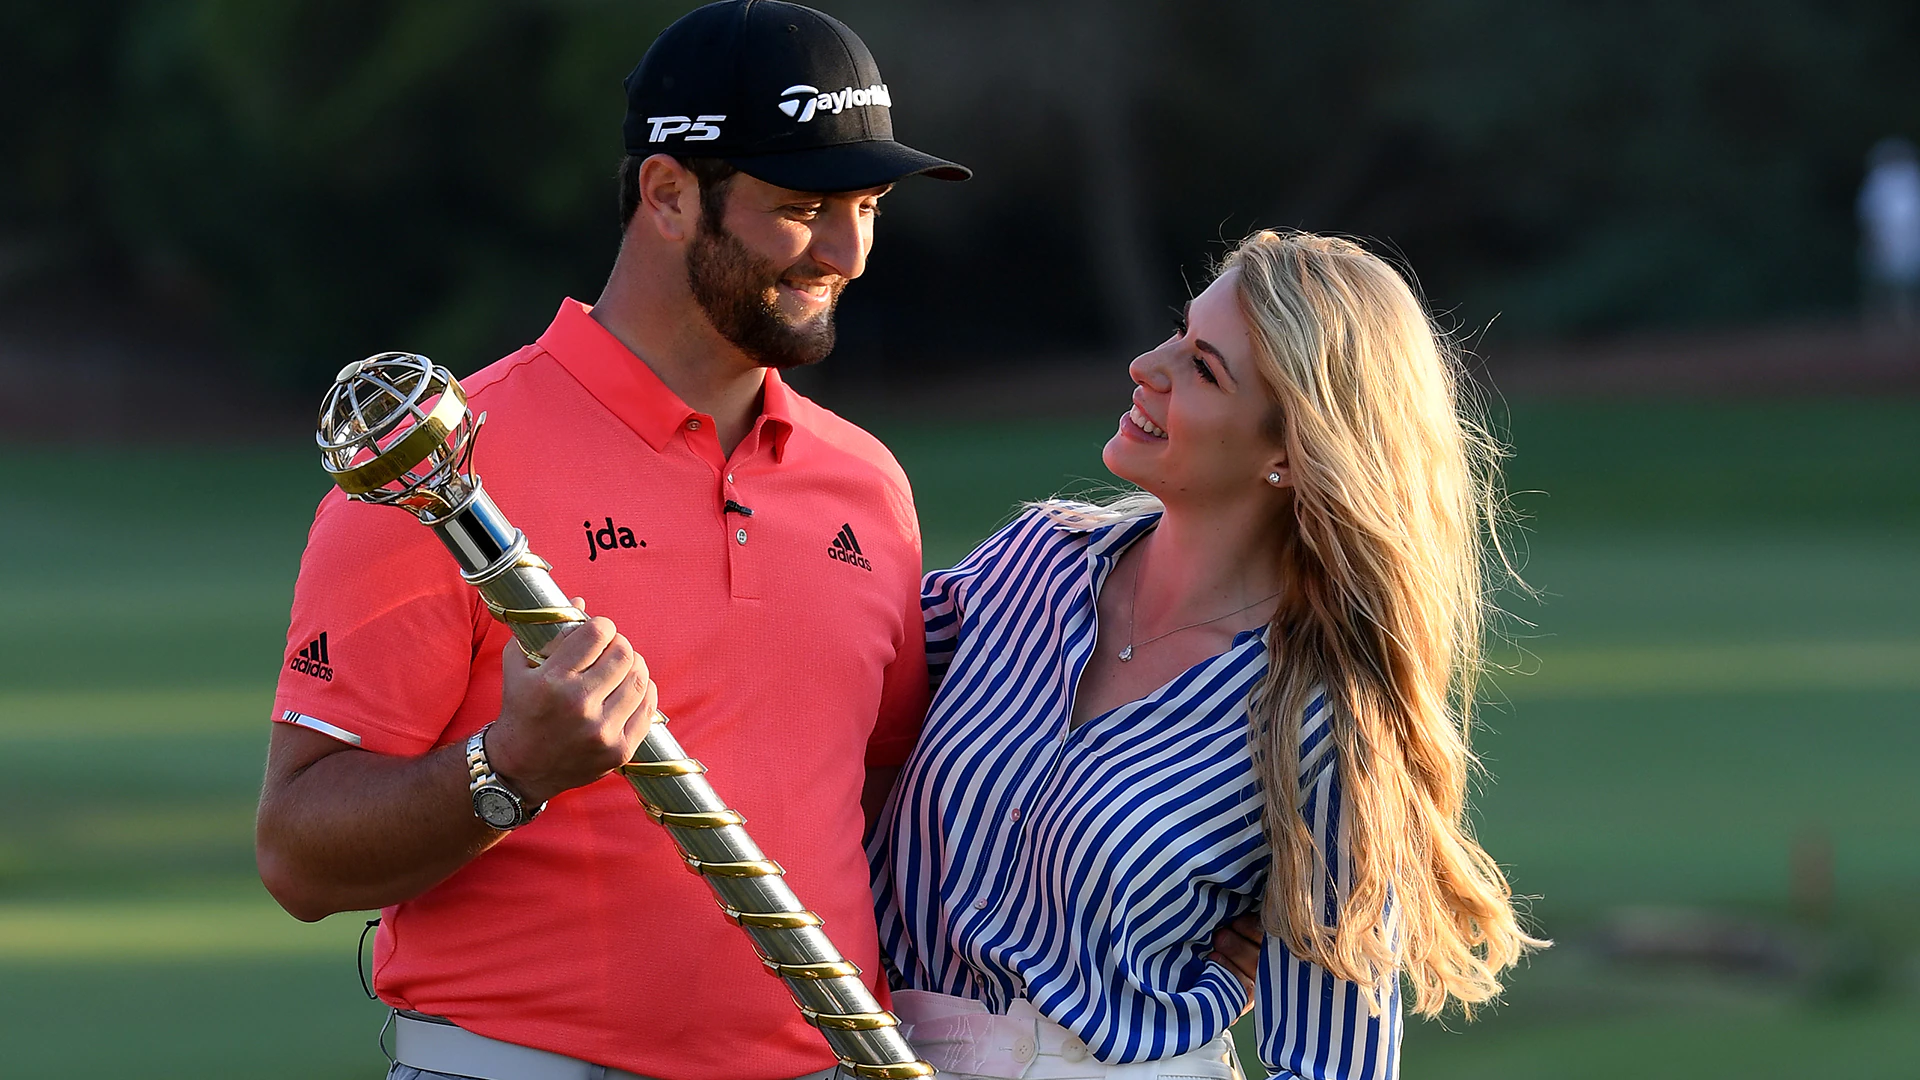 Dad-to-be Jon Rahm warns Masters bettors: Maybe avoid backing me